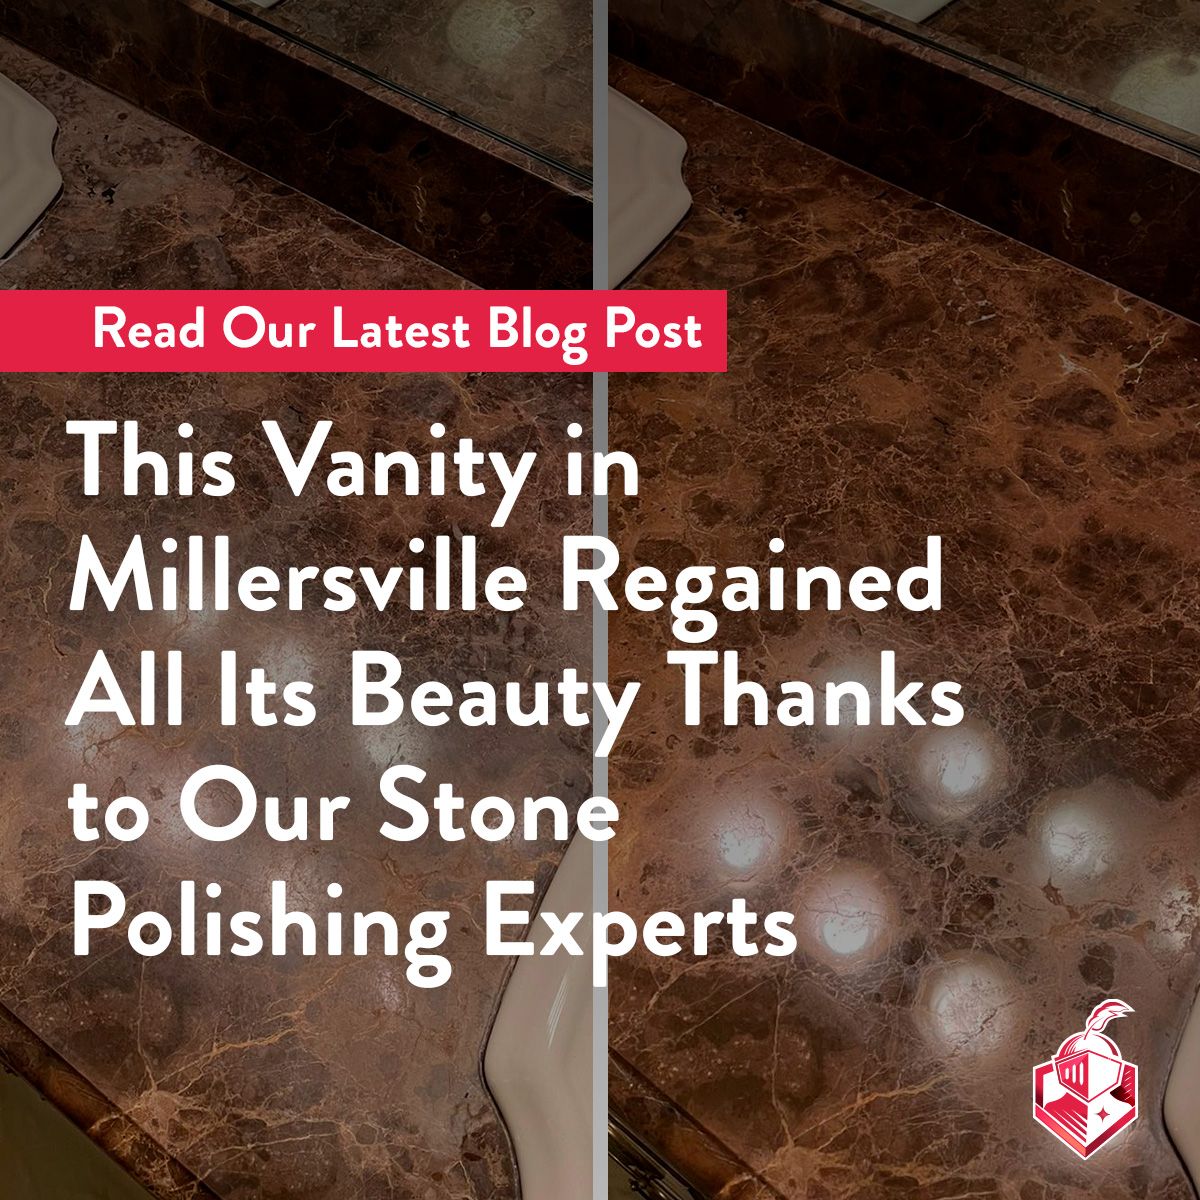 This Vanity in Millersville Regained All Its Beauty Thanks to Our Stone Polishing Experts